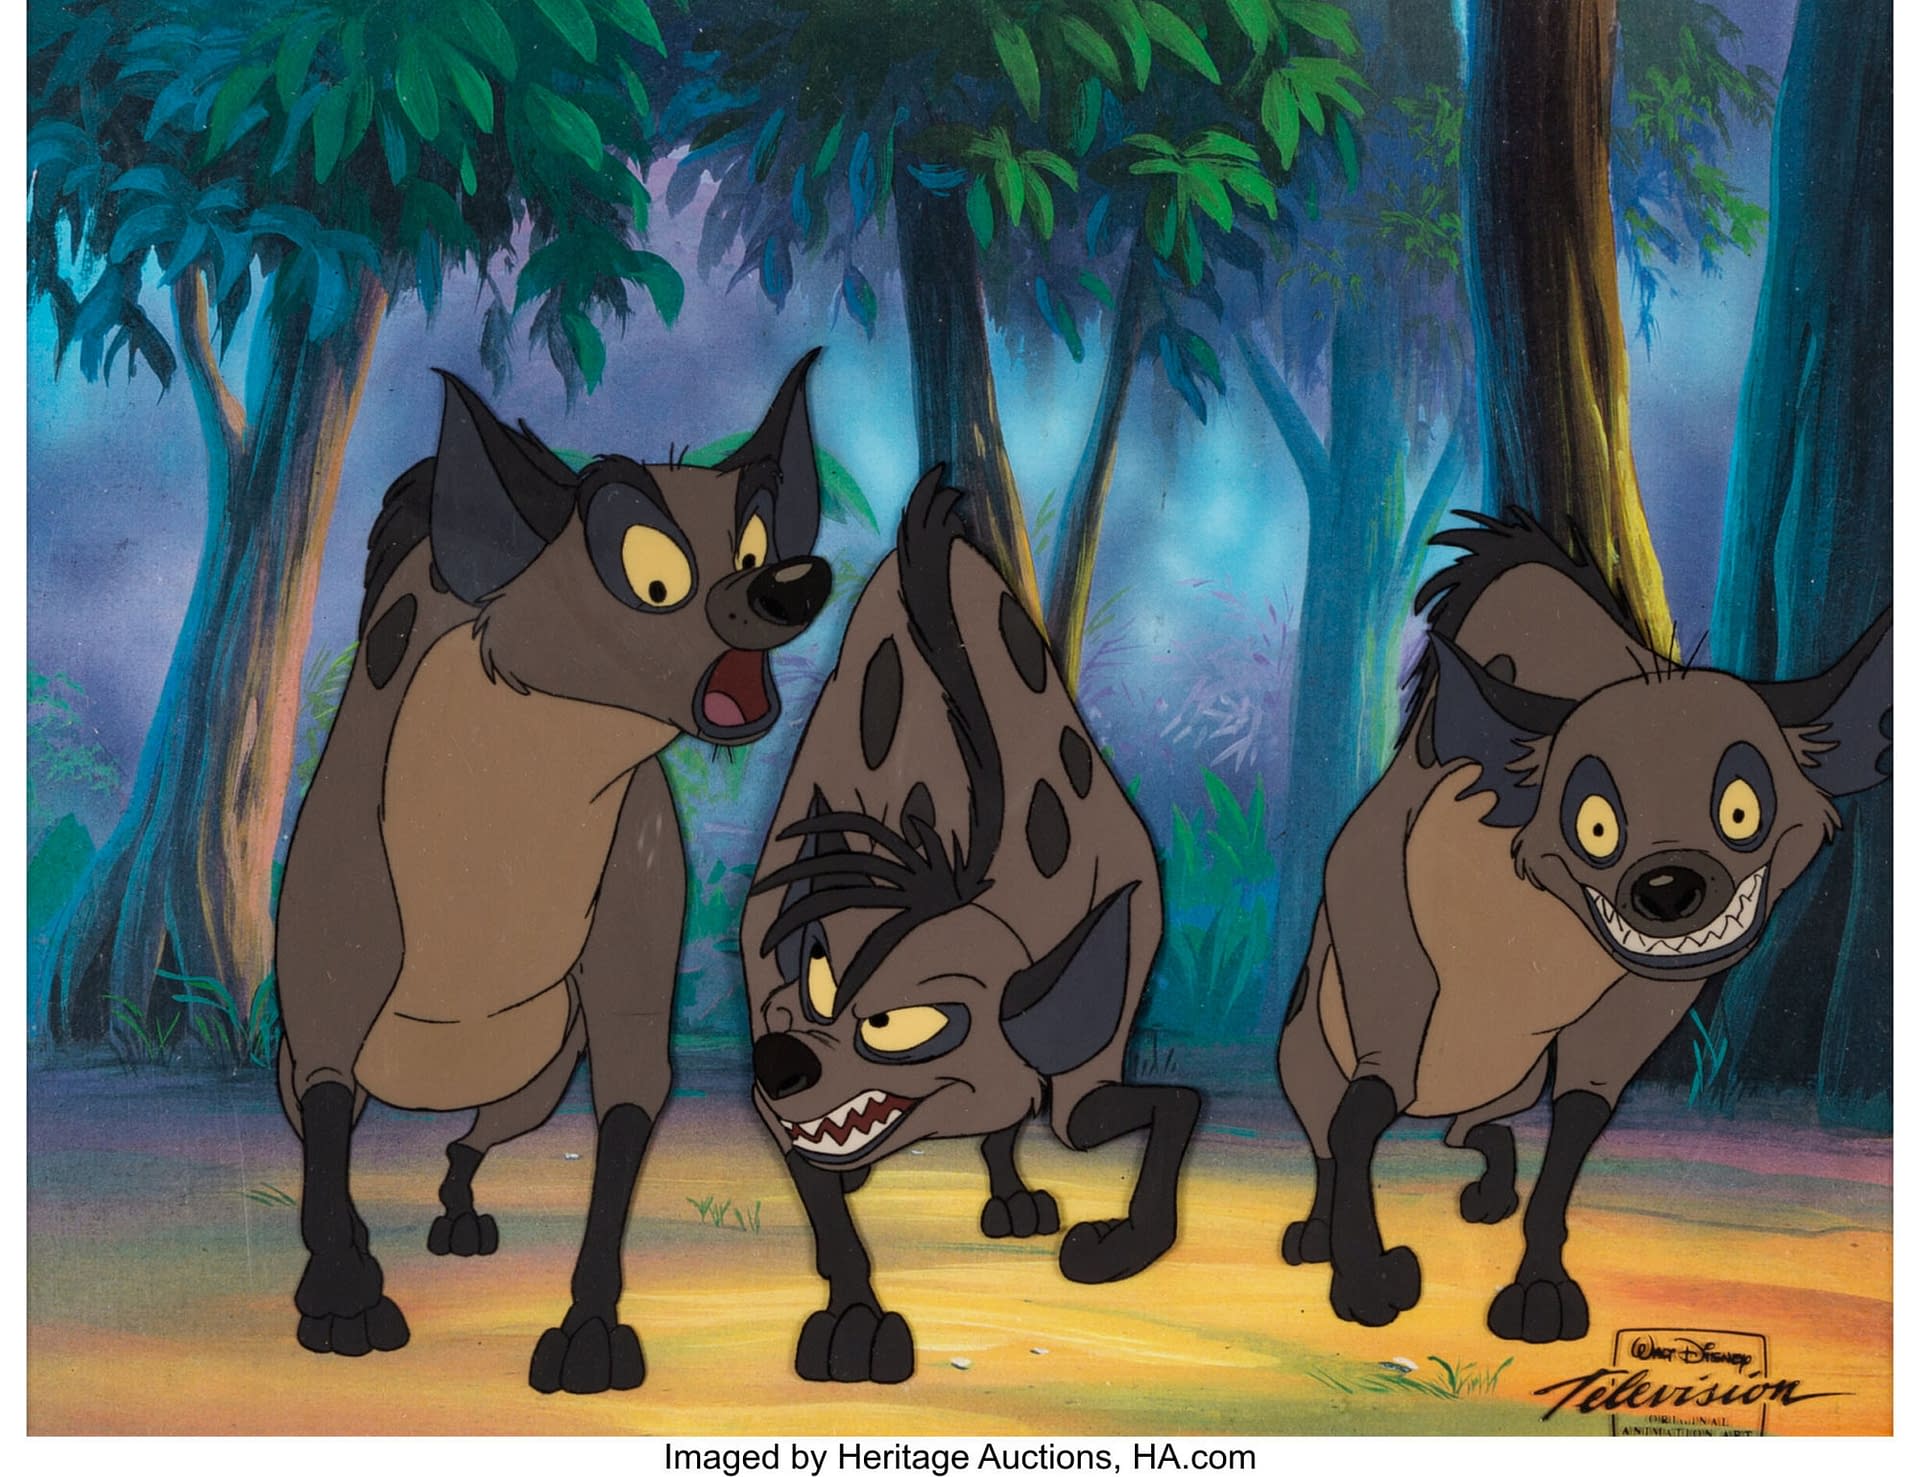 behuizing karakter Diagnostiseren The Hyenas From The Lion King Didn't Do Anything Wrong